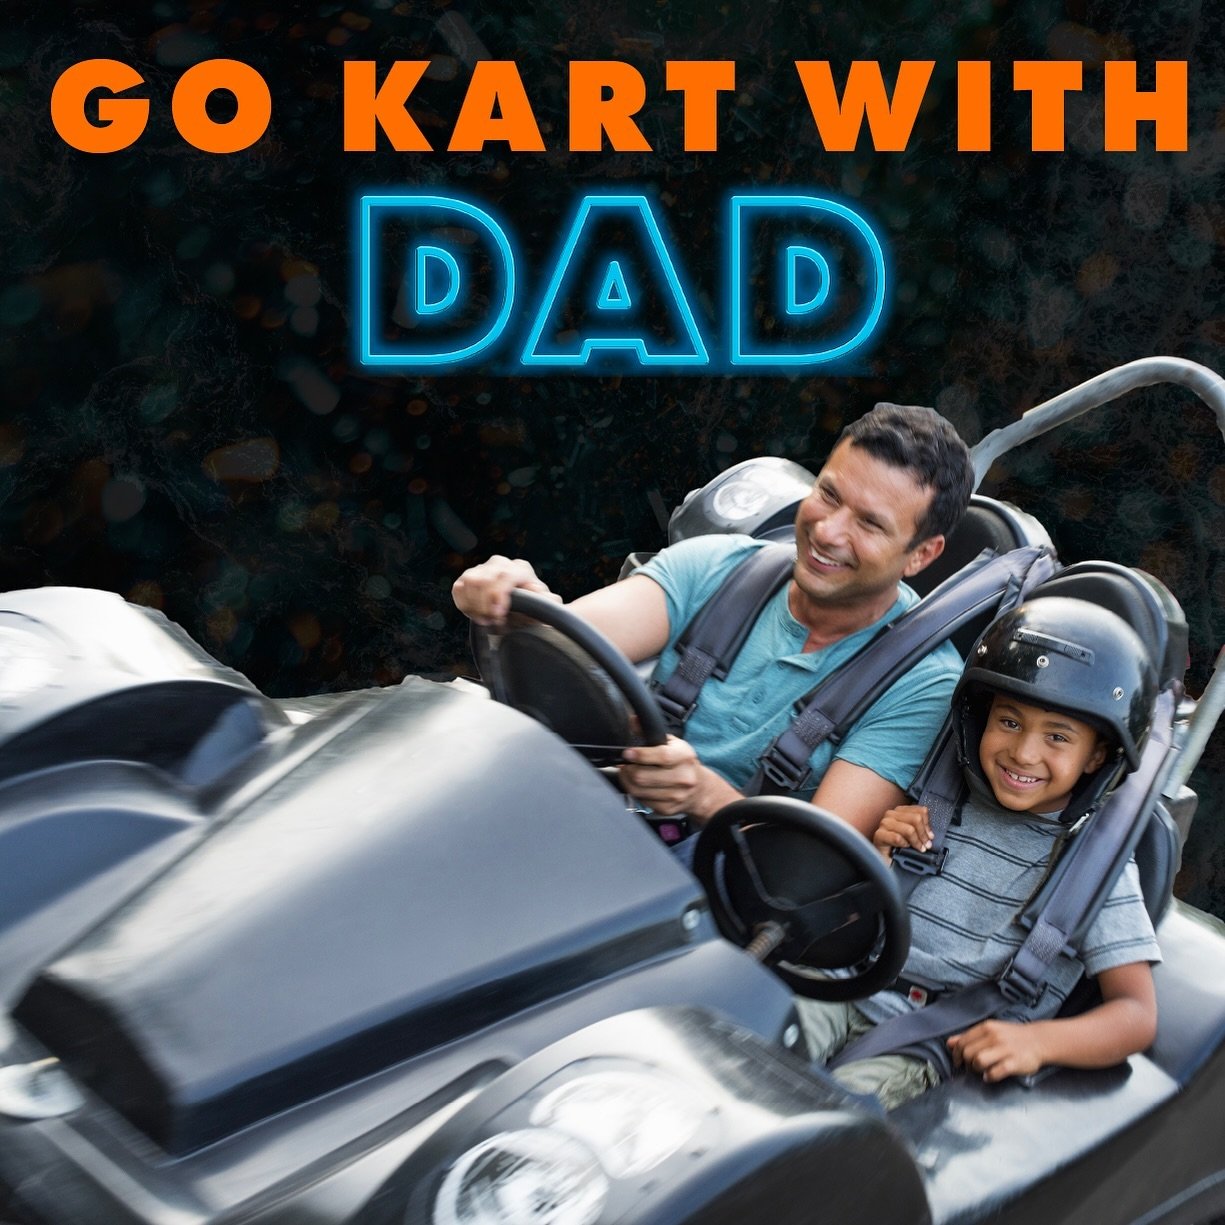 🏎️Speed into Father&rsquo;s Day with the ultimate Co-pilot- DAD! Treat Your Dad at Arnold&rsquo;s &ldquo;Treat Your Dad&rdquo; party on June 16th

🏁Go VIP at ArnoldsFFC.com! #dadandme #makeitmontco #gokartingadventures #domorein24 #mainline #father